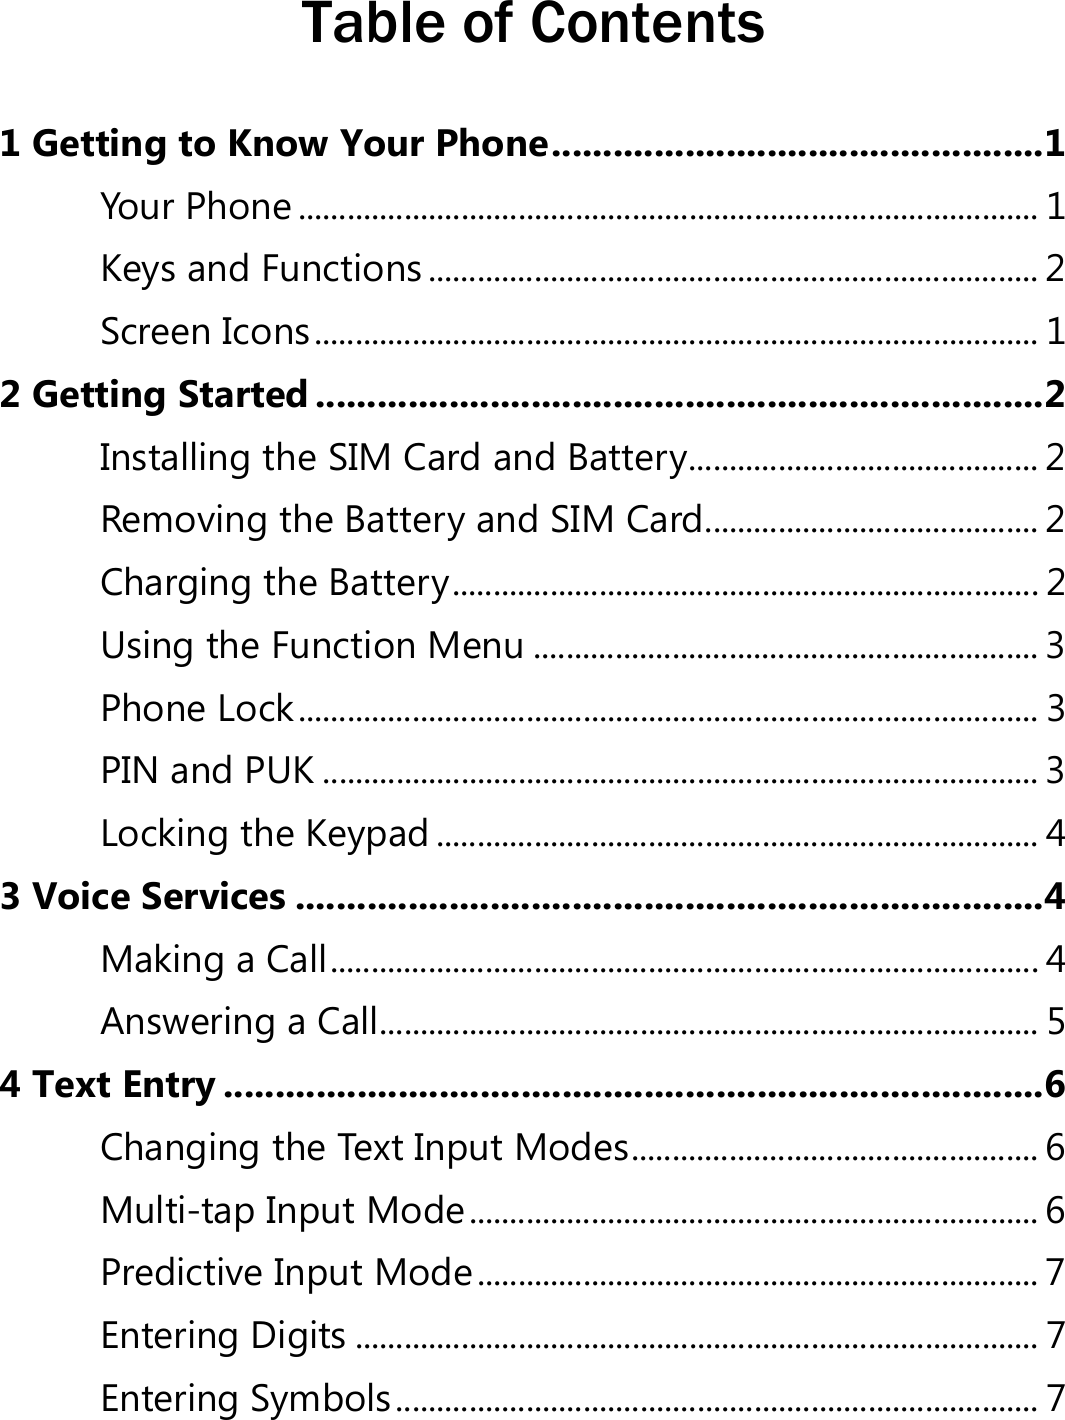  Table of Contents 1 Getting to Know Your Phone ................................................1 Your Phone ........................................................................................... 1 Keys and Functions ........................................................................... 2 Screen Icons ......................................................................................... 1 2 Getting Started .......................................................................2 Installing the SIM Card and Battery ........................................... 2 Removing the Battery and SIM Card ......................................... 2 Charging the Battery ........................................................................ 2 Using the Function Menu .............................................................. 3 Phone Lock ........................................................................................... 3 PIN and PUK ........................................................................................ 3 Locking the Keypad .......................................................................... 4 3 Voice Services .........................................................................4 Making a Call ....................................................................................... 4 Answering a Call ................................................................................. 5 4 Text Entry ................................................................................6 Changing the Text Input Modes .................................................. 6 Multi-tap Input Mode ...................................................................... 6 Predictive Input Mode ..................................................................... 7 Entering Digits .................................................................................... 7 Entering Symbols ............................................................................... 7 